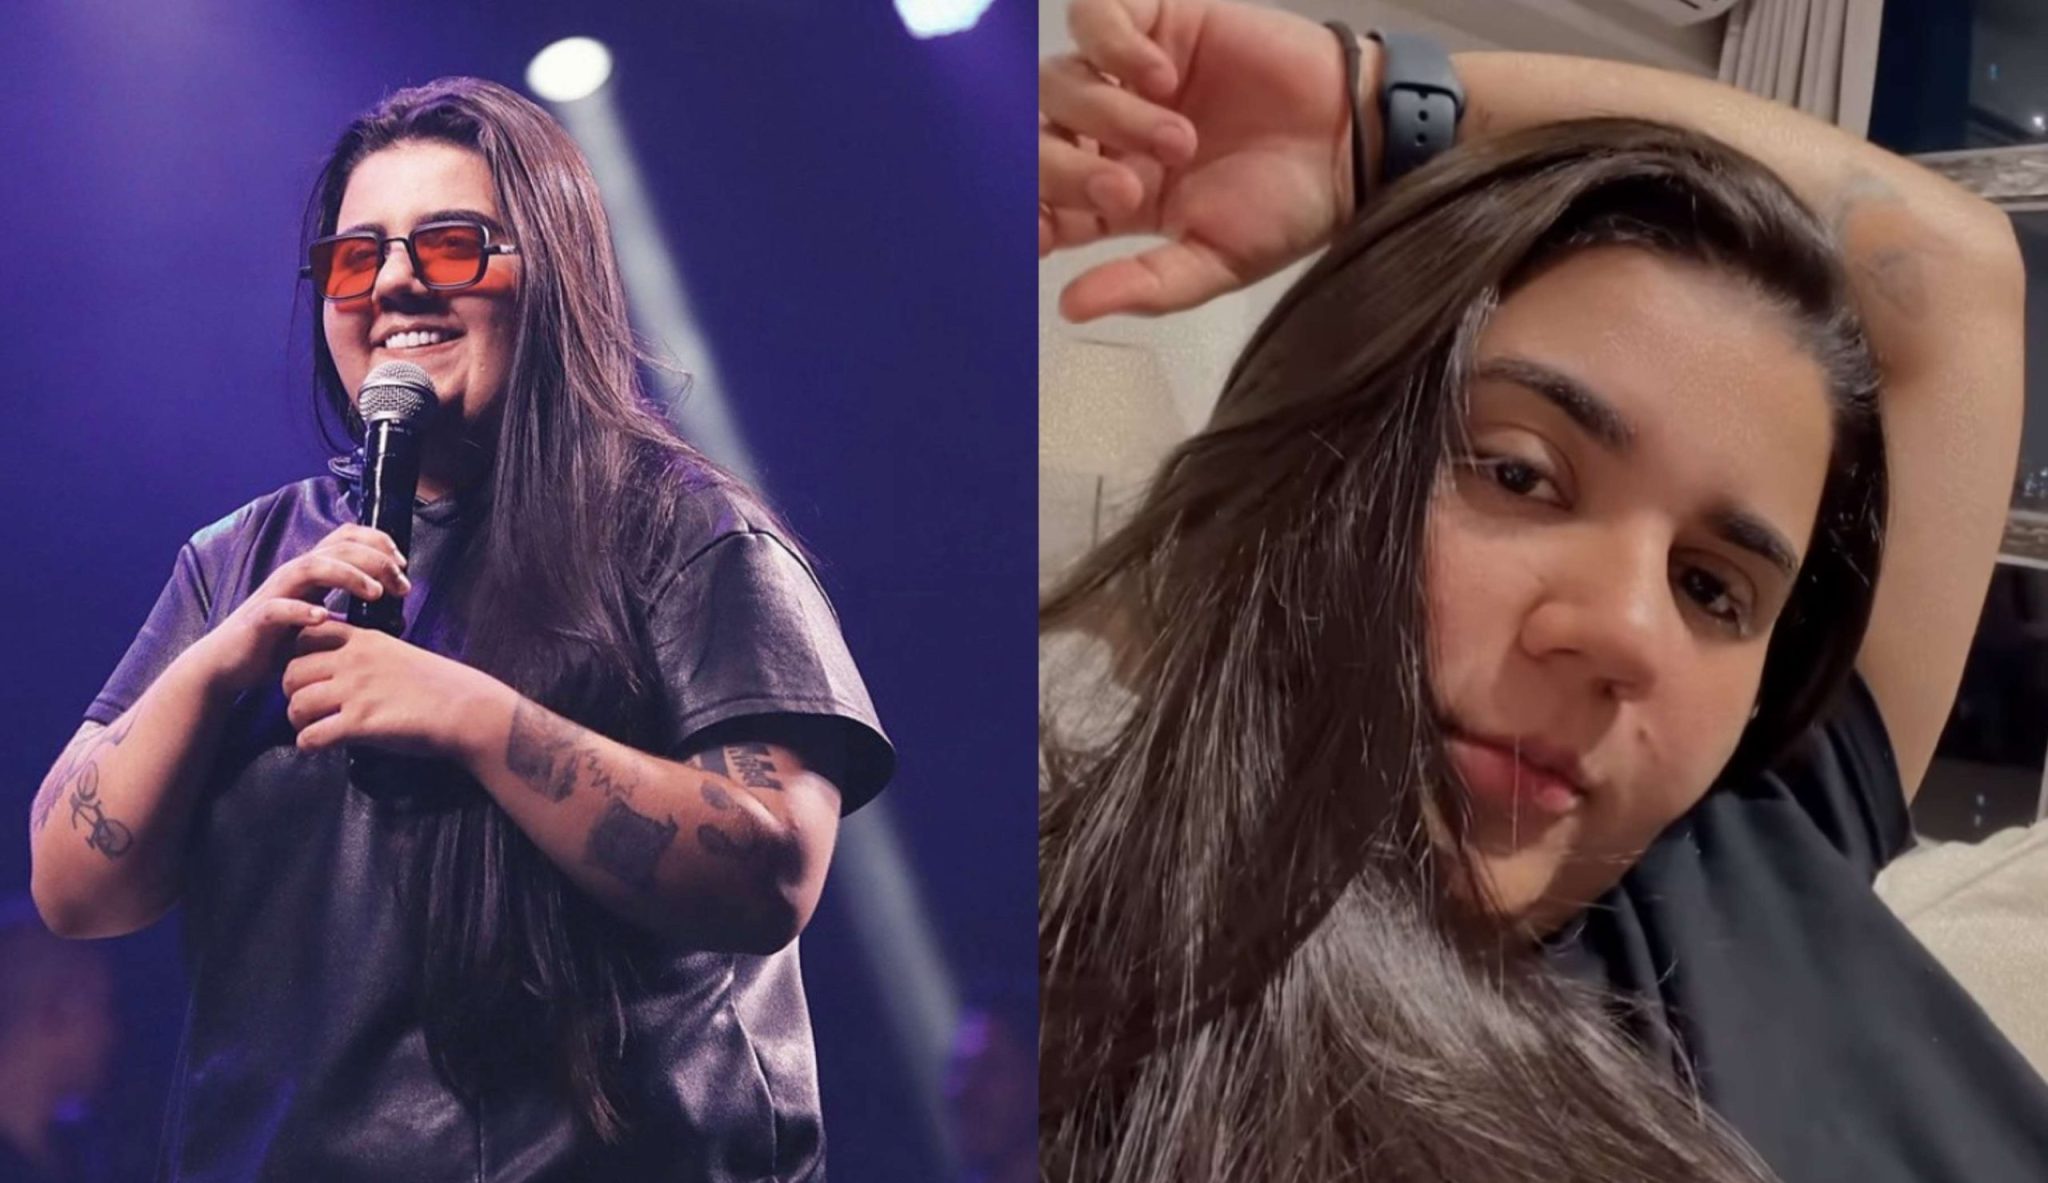 In violent action, singer Yasmin Santos and girlfriend are robbed